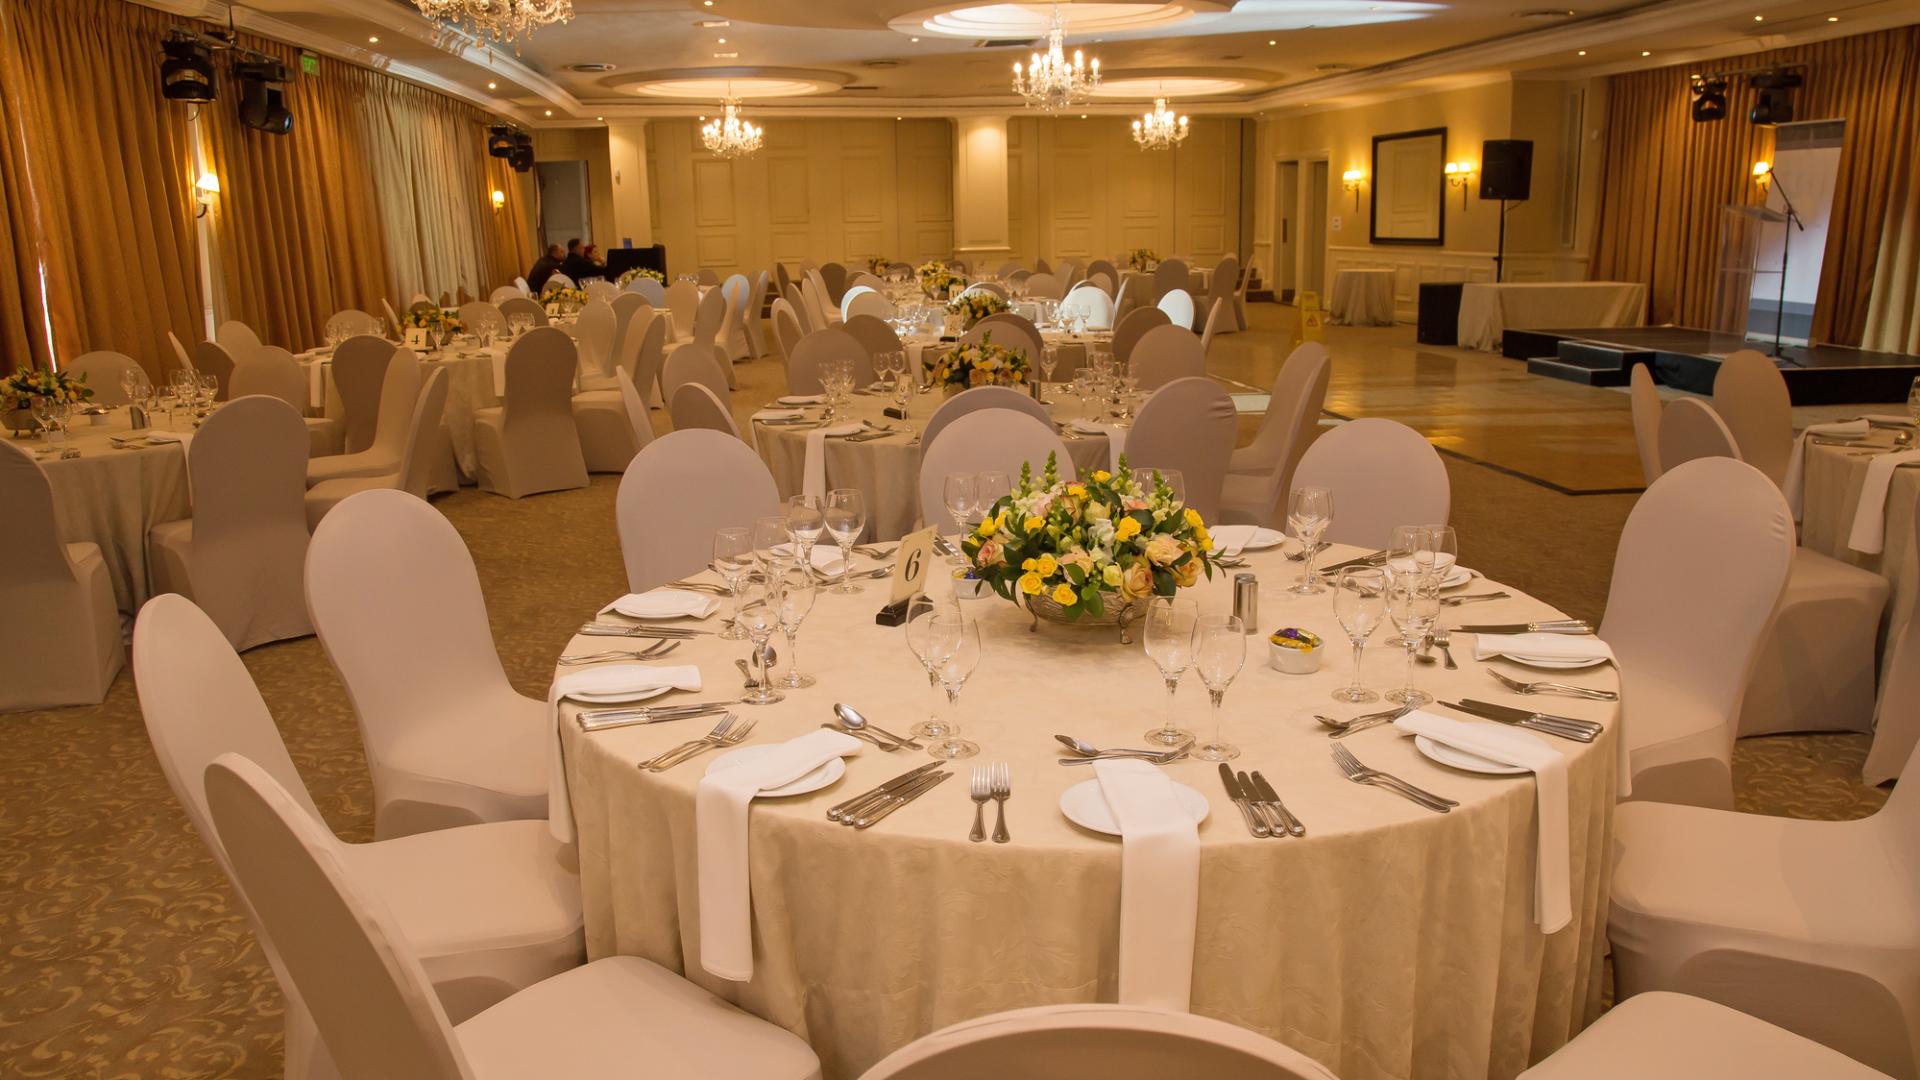 Gala Dinner Venues for Hire in Central London